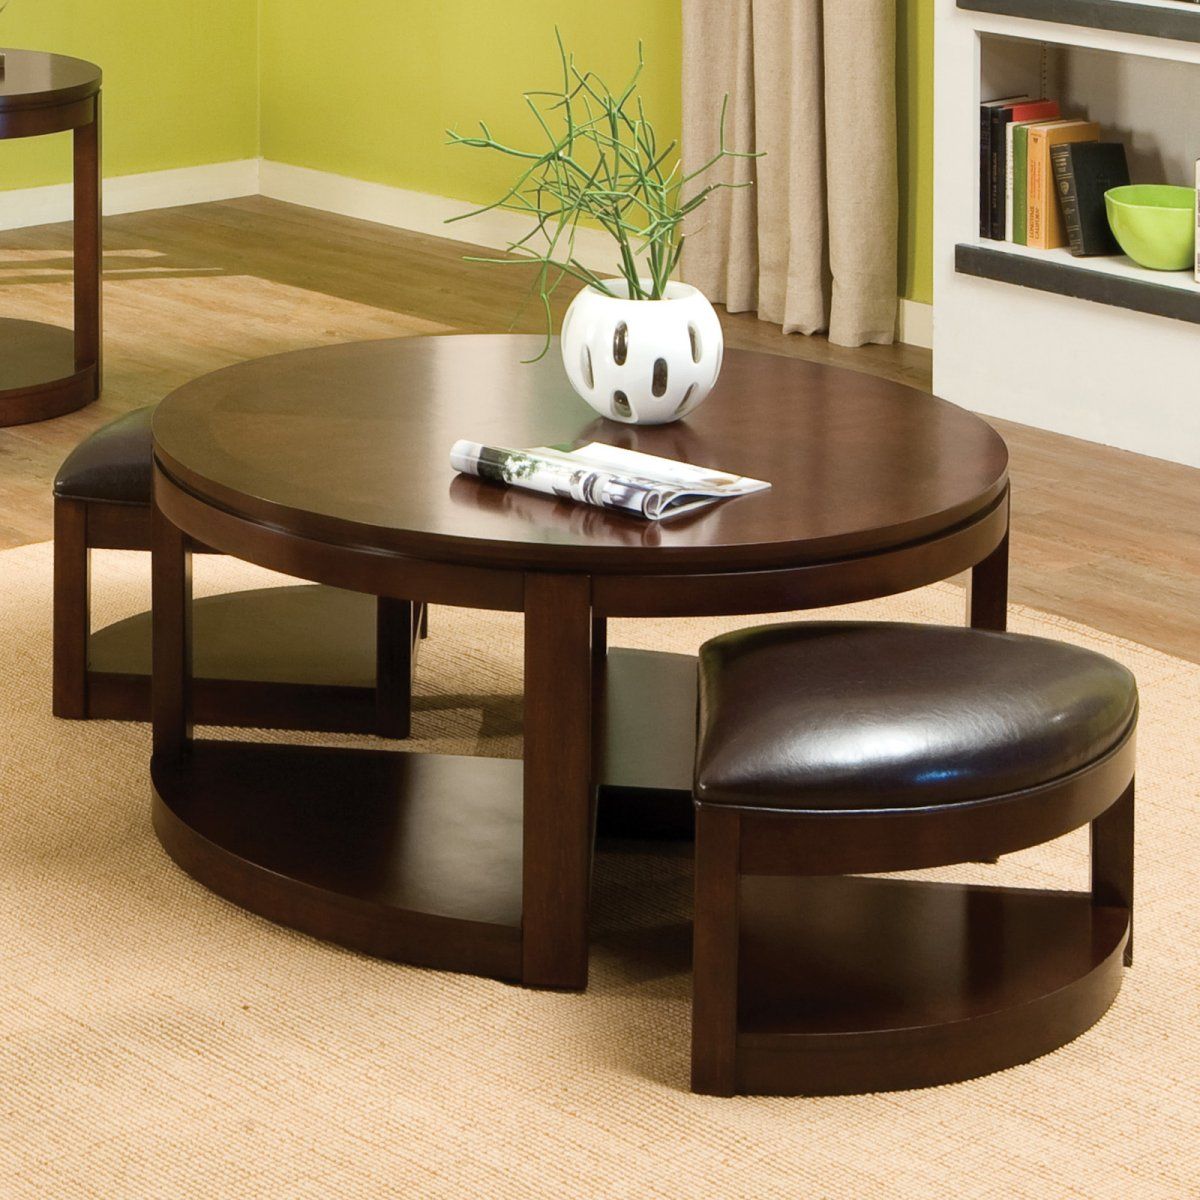 The Round Coffee Tables With Storage – The Simple And Compact Furniture Inside Round Coffee Tables (View 17 of 20)